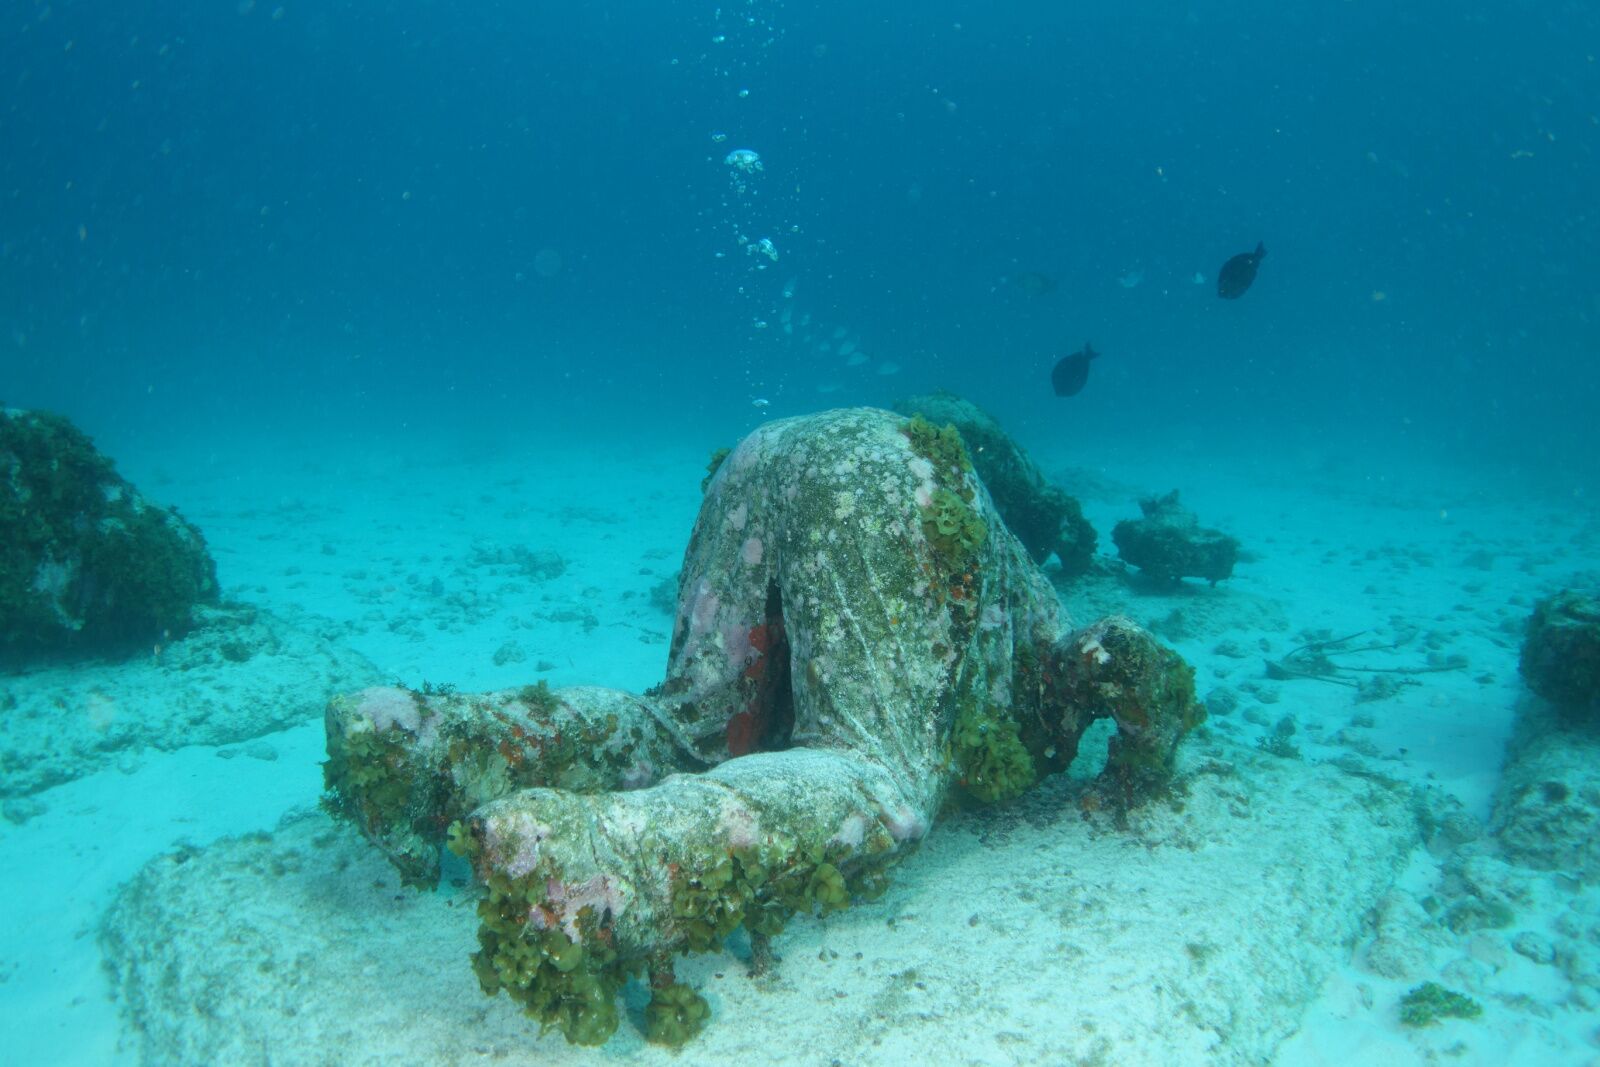 the bankers, a sculpture at the cancun underwater museum